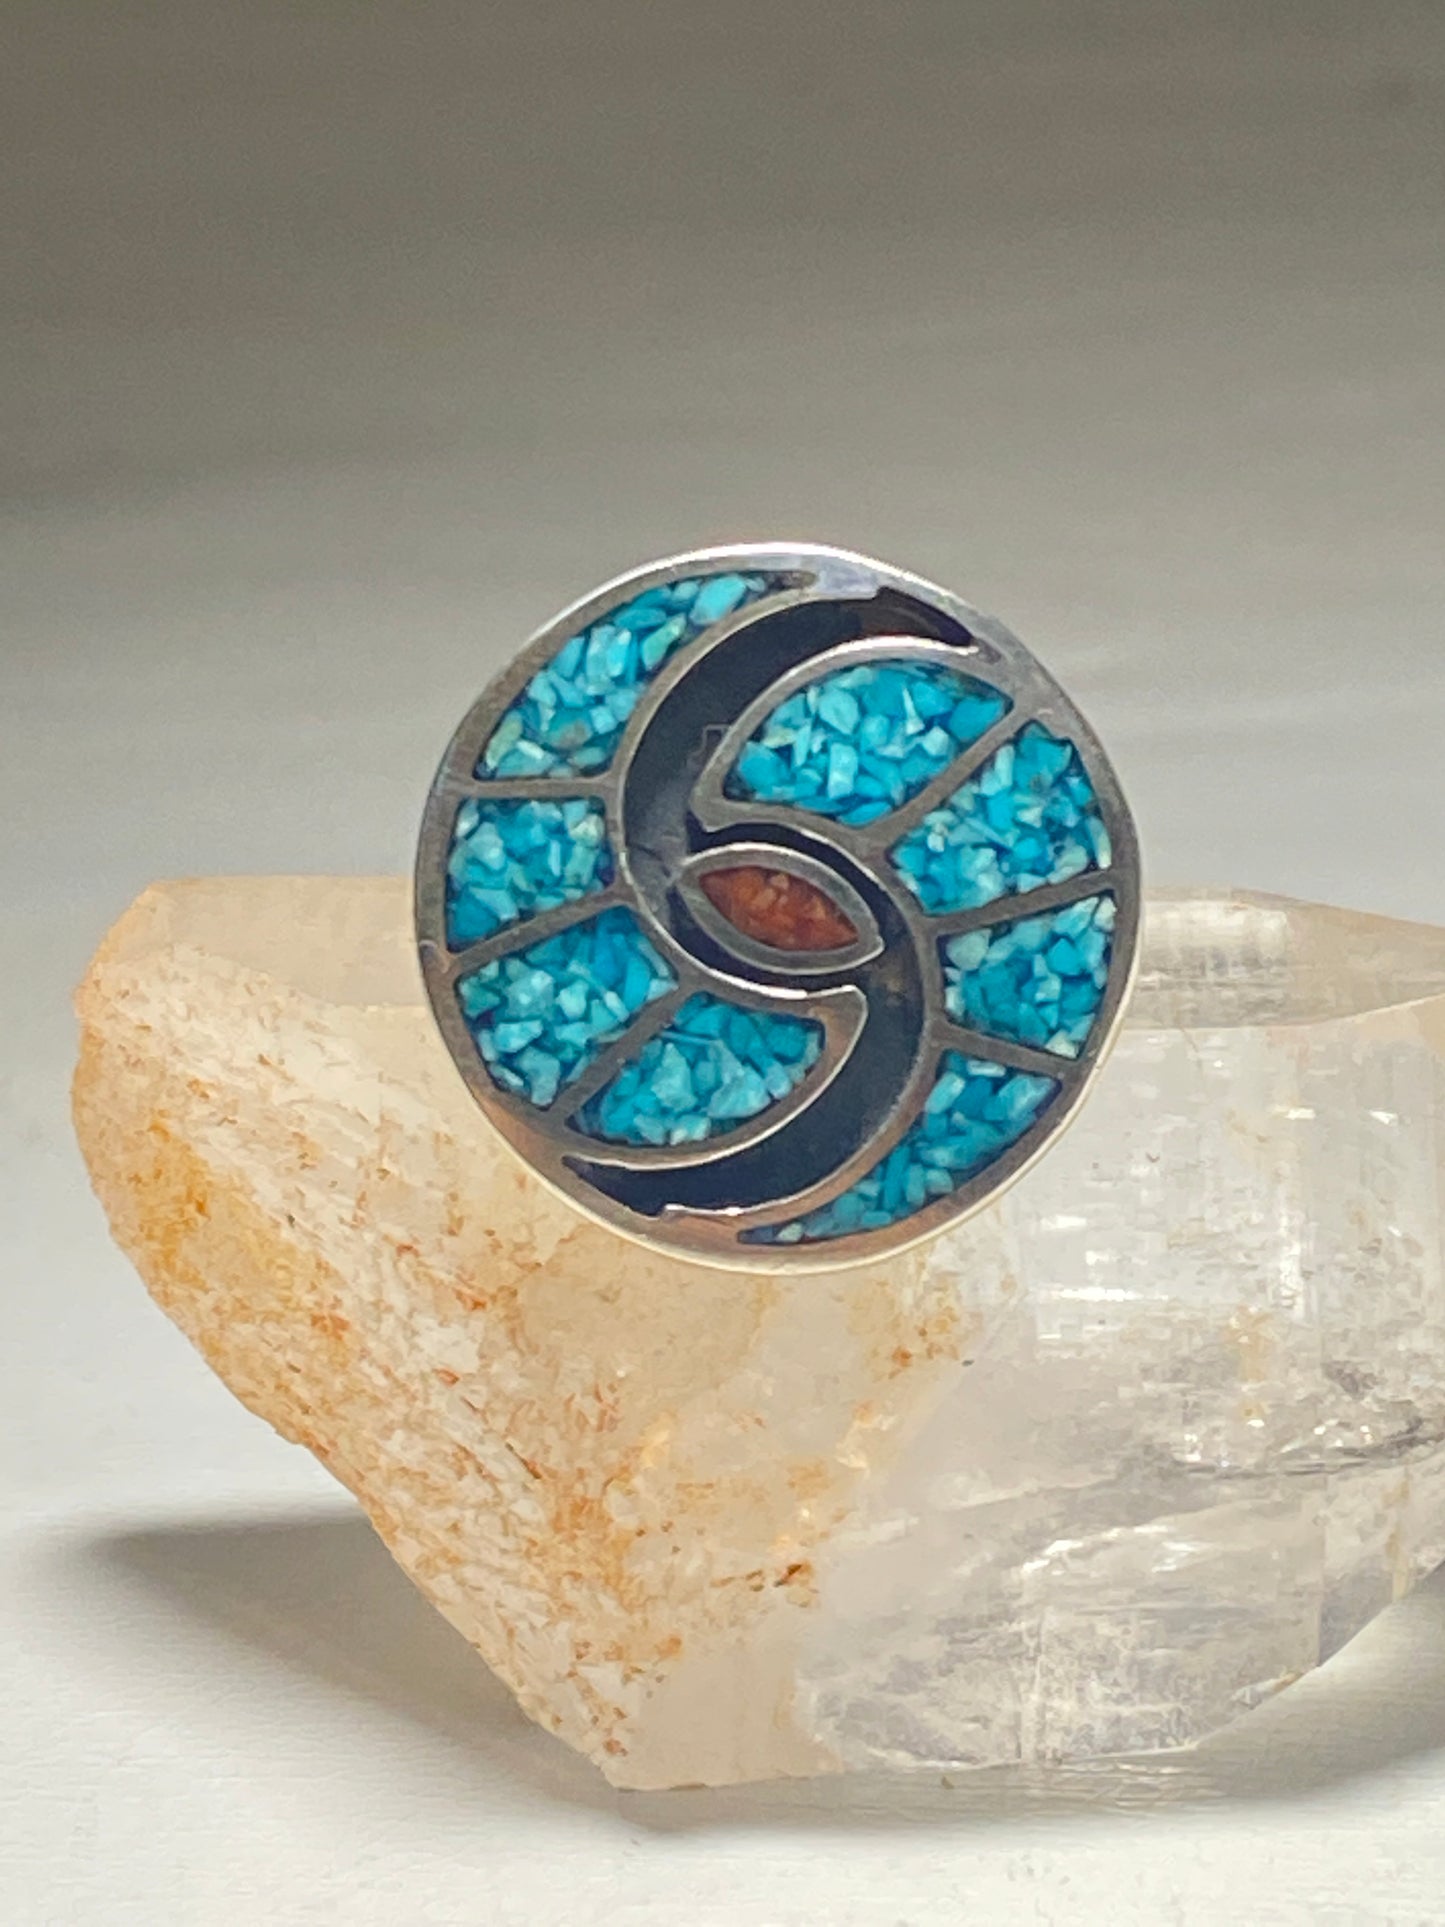 Turquoise chip ring coral hummingbird design southwest sterling silver women